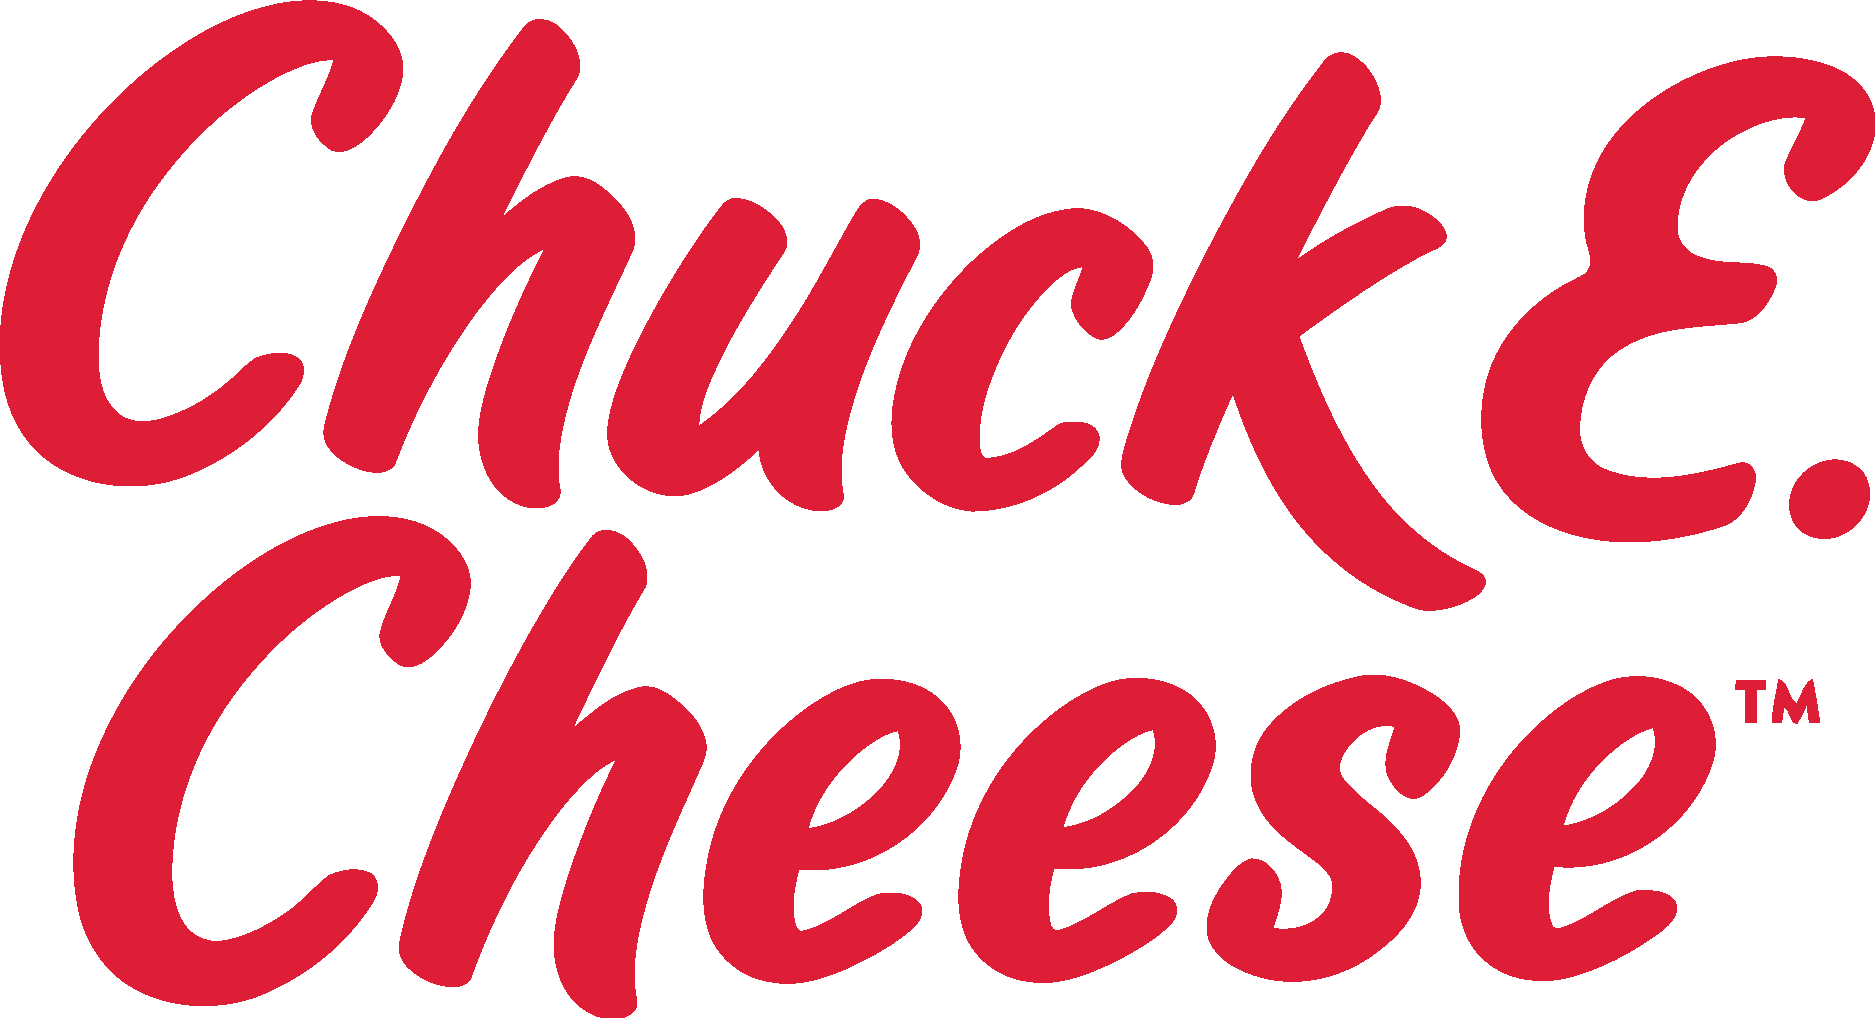 Chuck E. Cheese Wordmark Logo Vector - (.Ai .PNG .SVG .EPS Free Download)